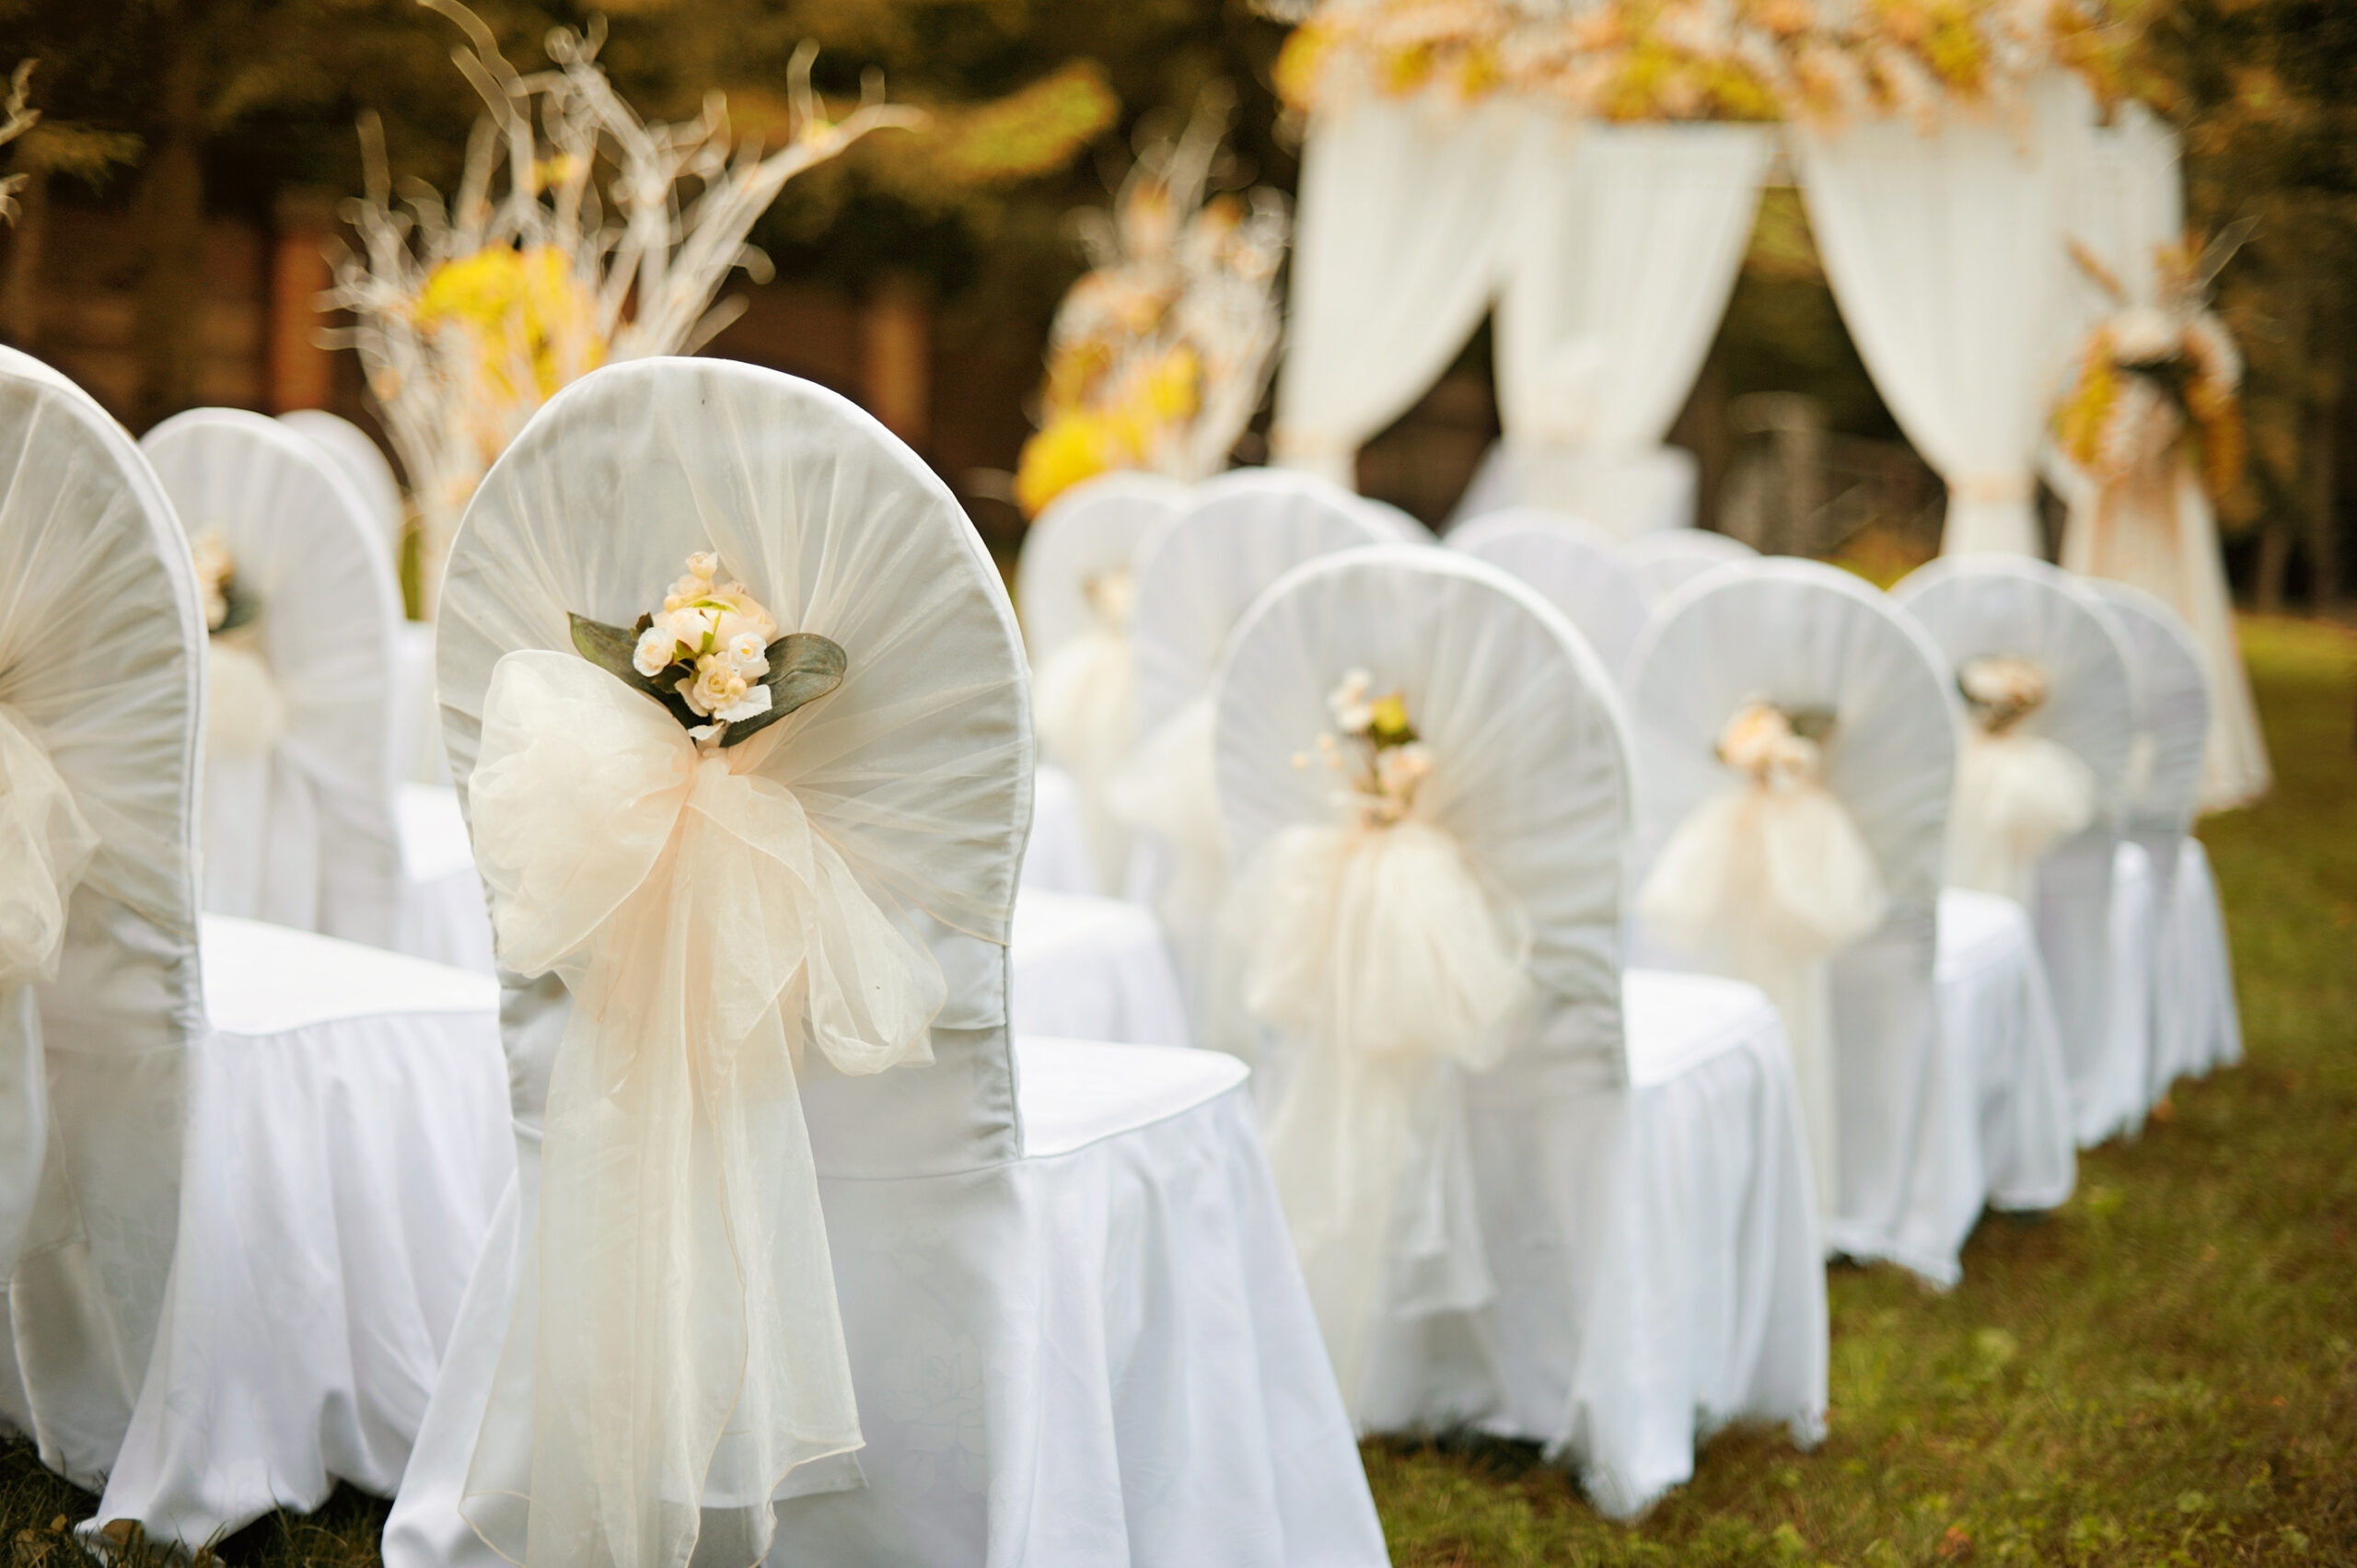 Chair covers and decorations for weddings